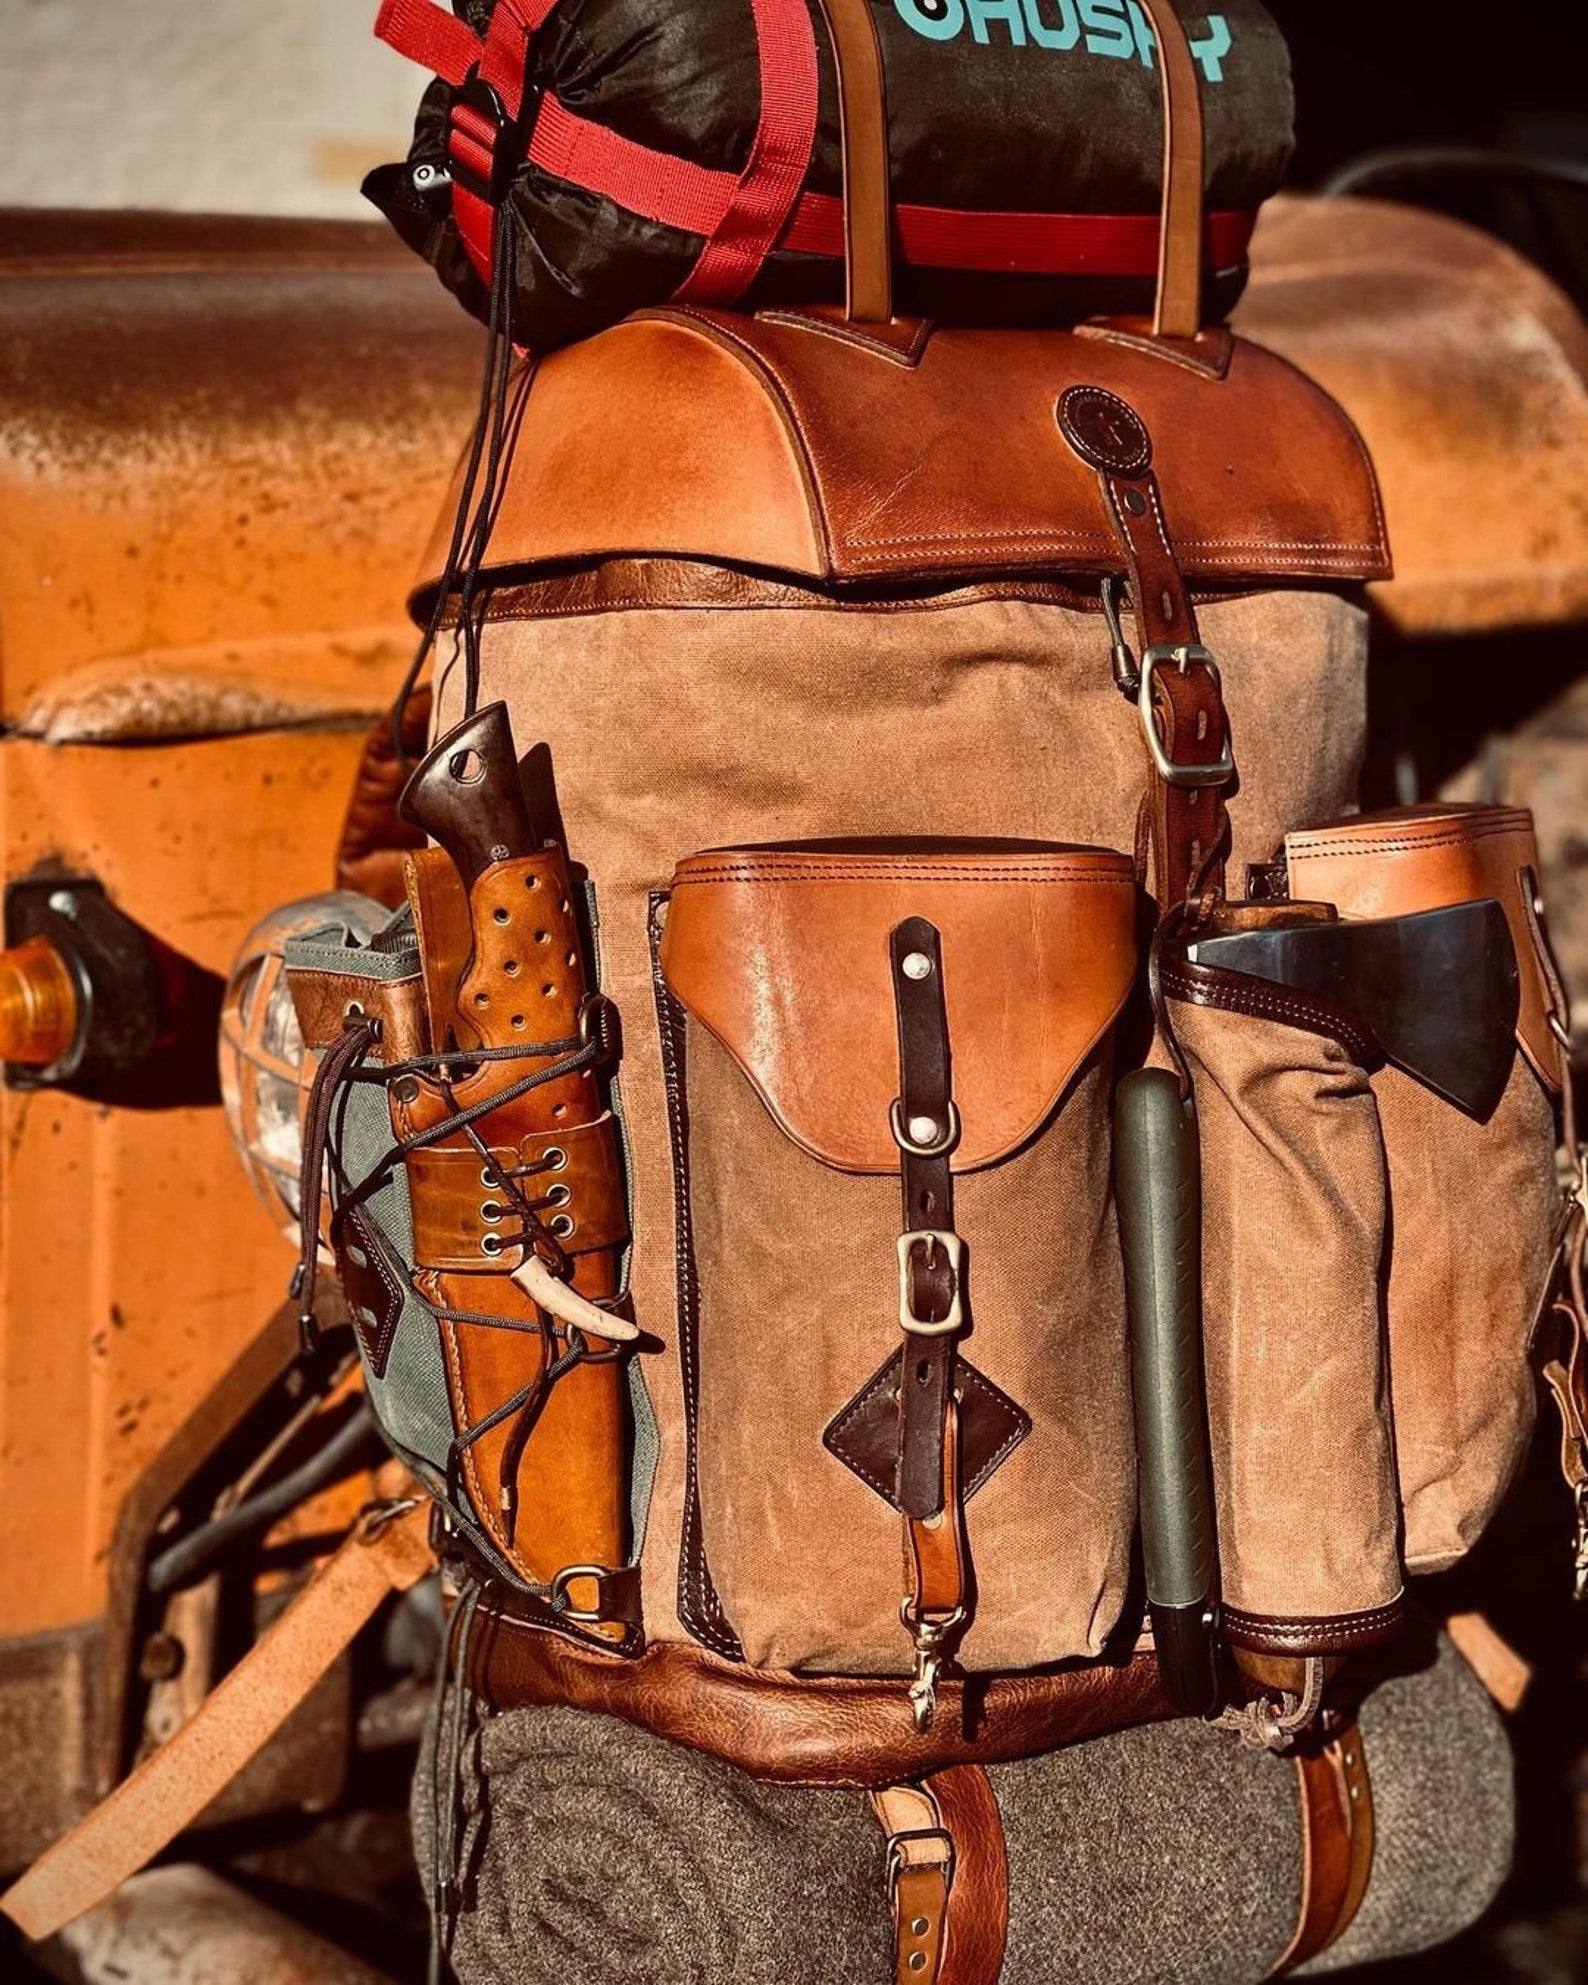 Camping Backpack | Camping Backpacks | Handmade Leather, Waxed Backpack for Travel, Camping, Hunting, Bushcraft, Hiking | 45 Liter | Survival | Personalization bushcraft - camping - hiking backpack 99percenthandmade   